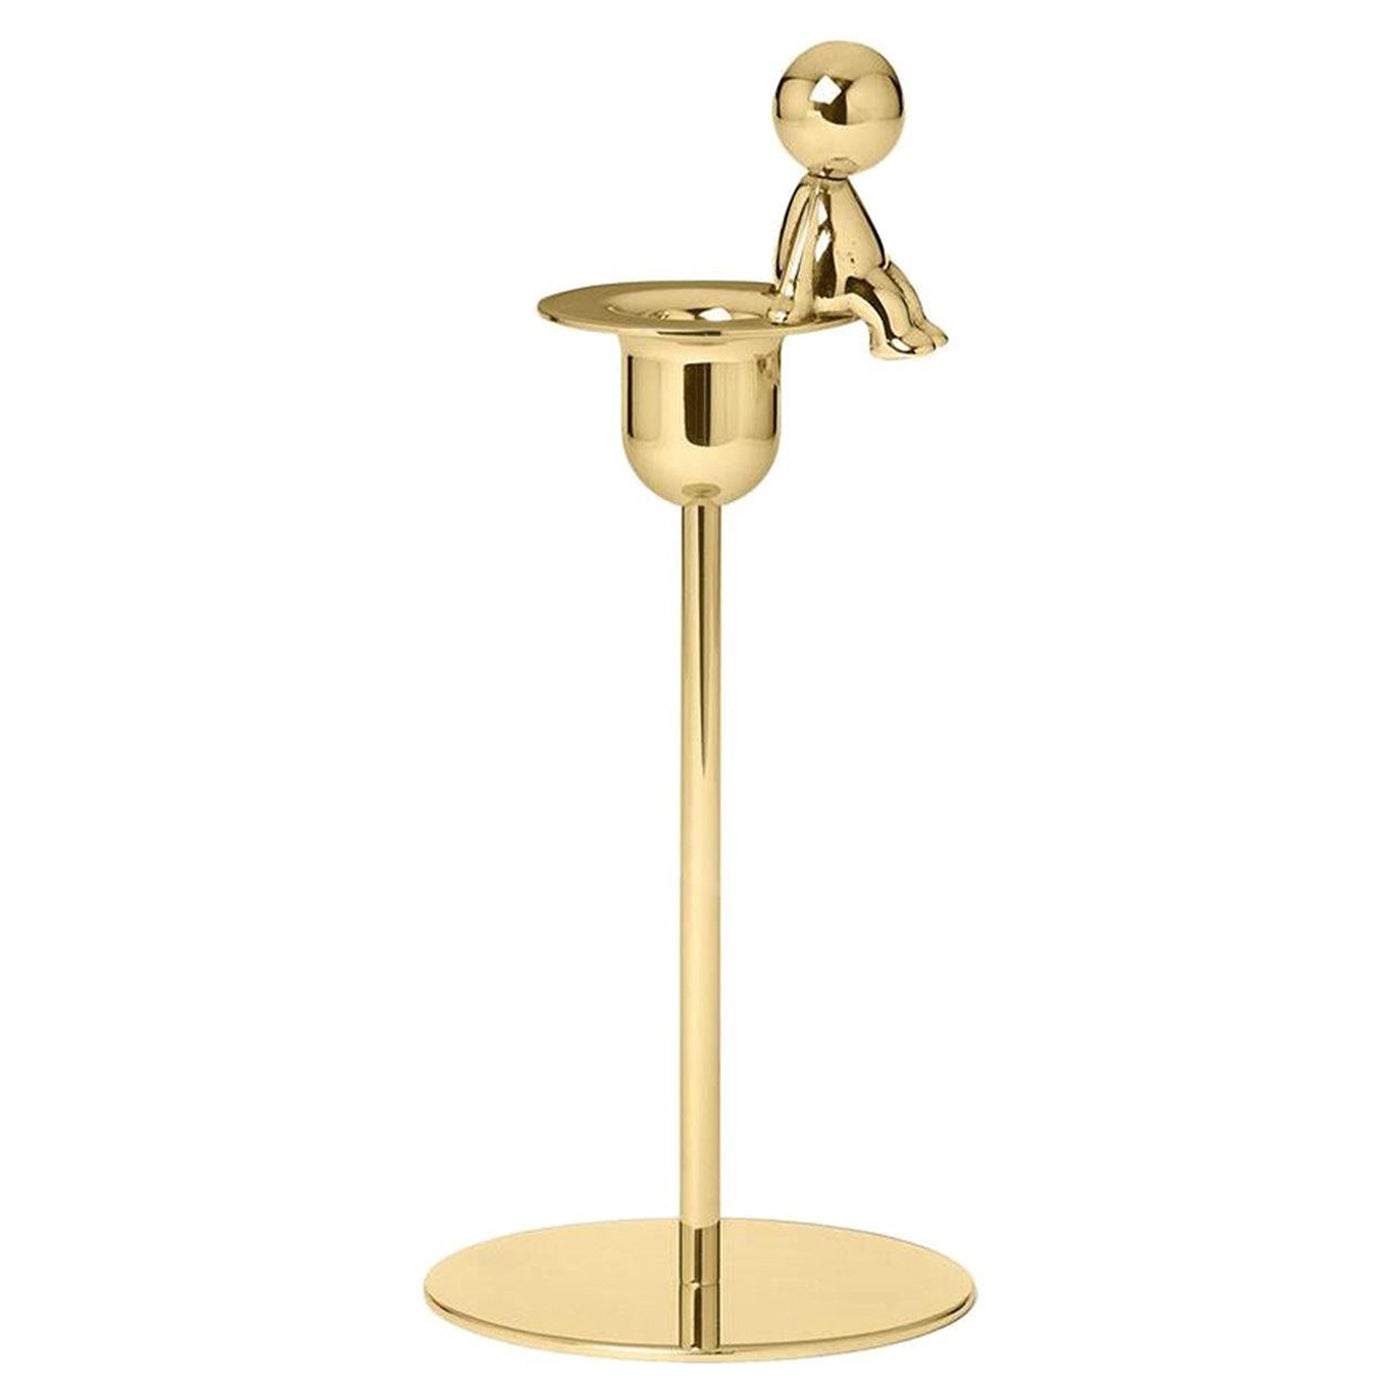  Omini Thinker Short Candlestick in Polished Brass By Stefano Giovannoni For Sale